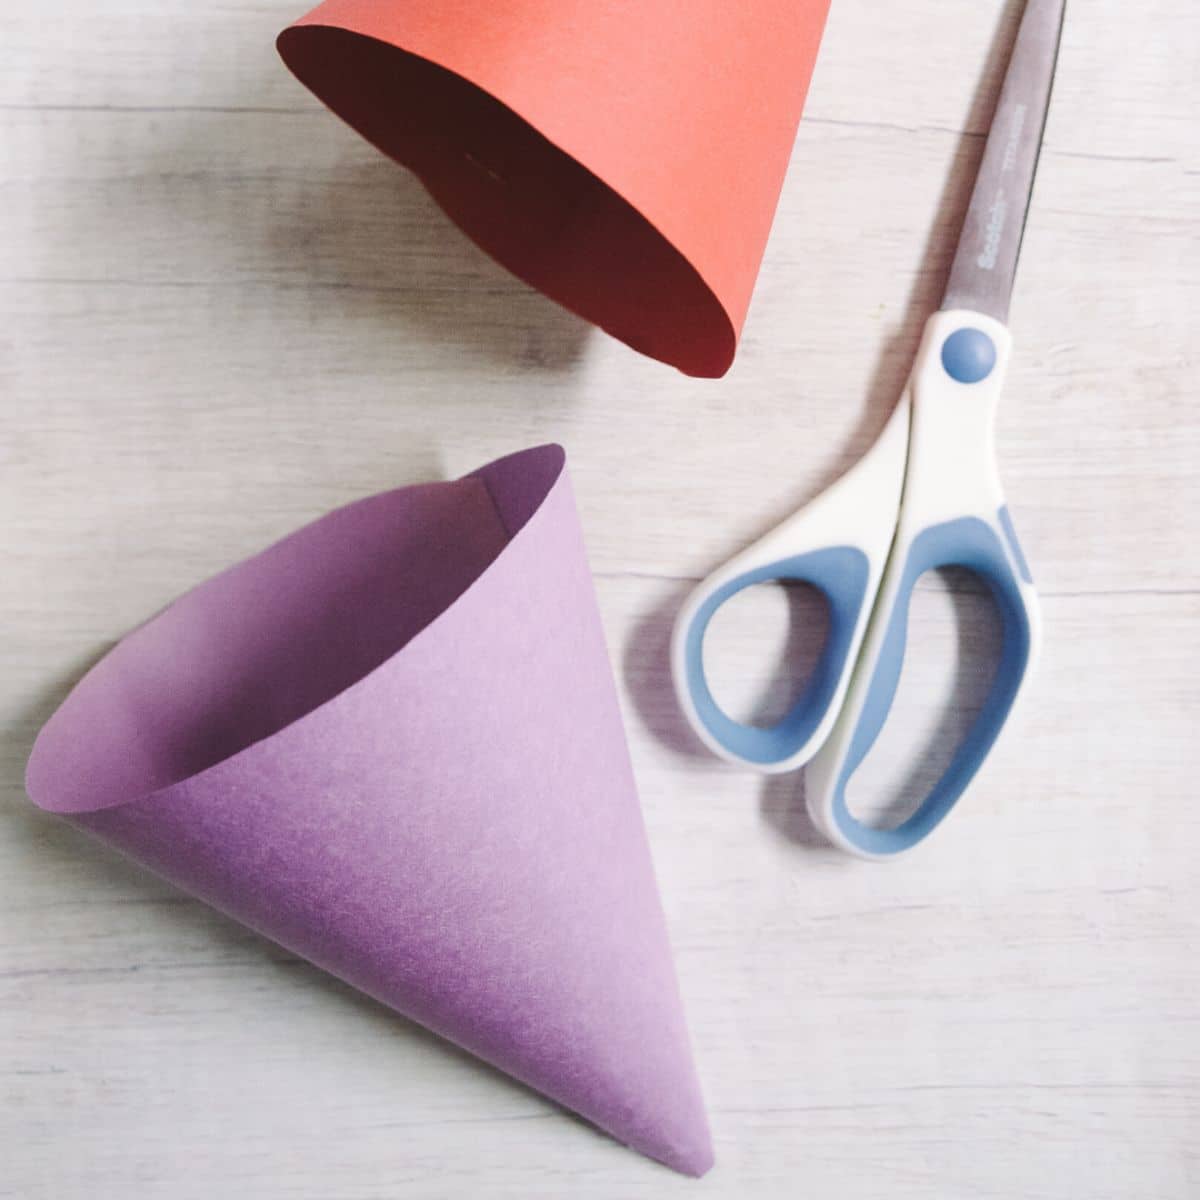 Purple and red paper cones made with construction paper, laying with a scissors on a table top.